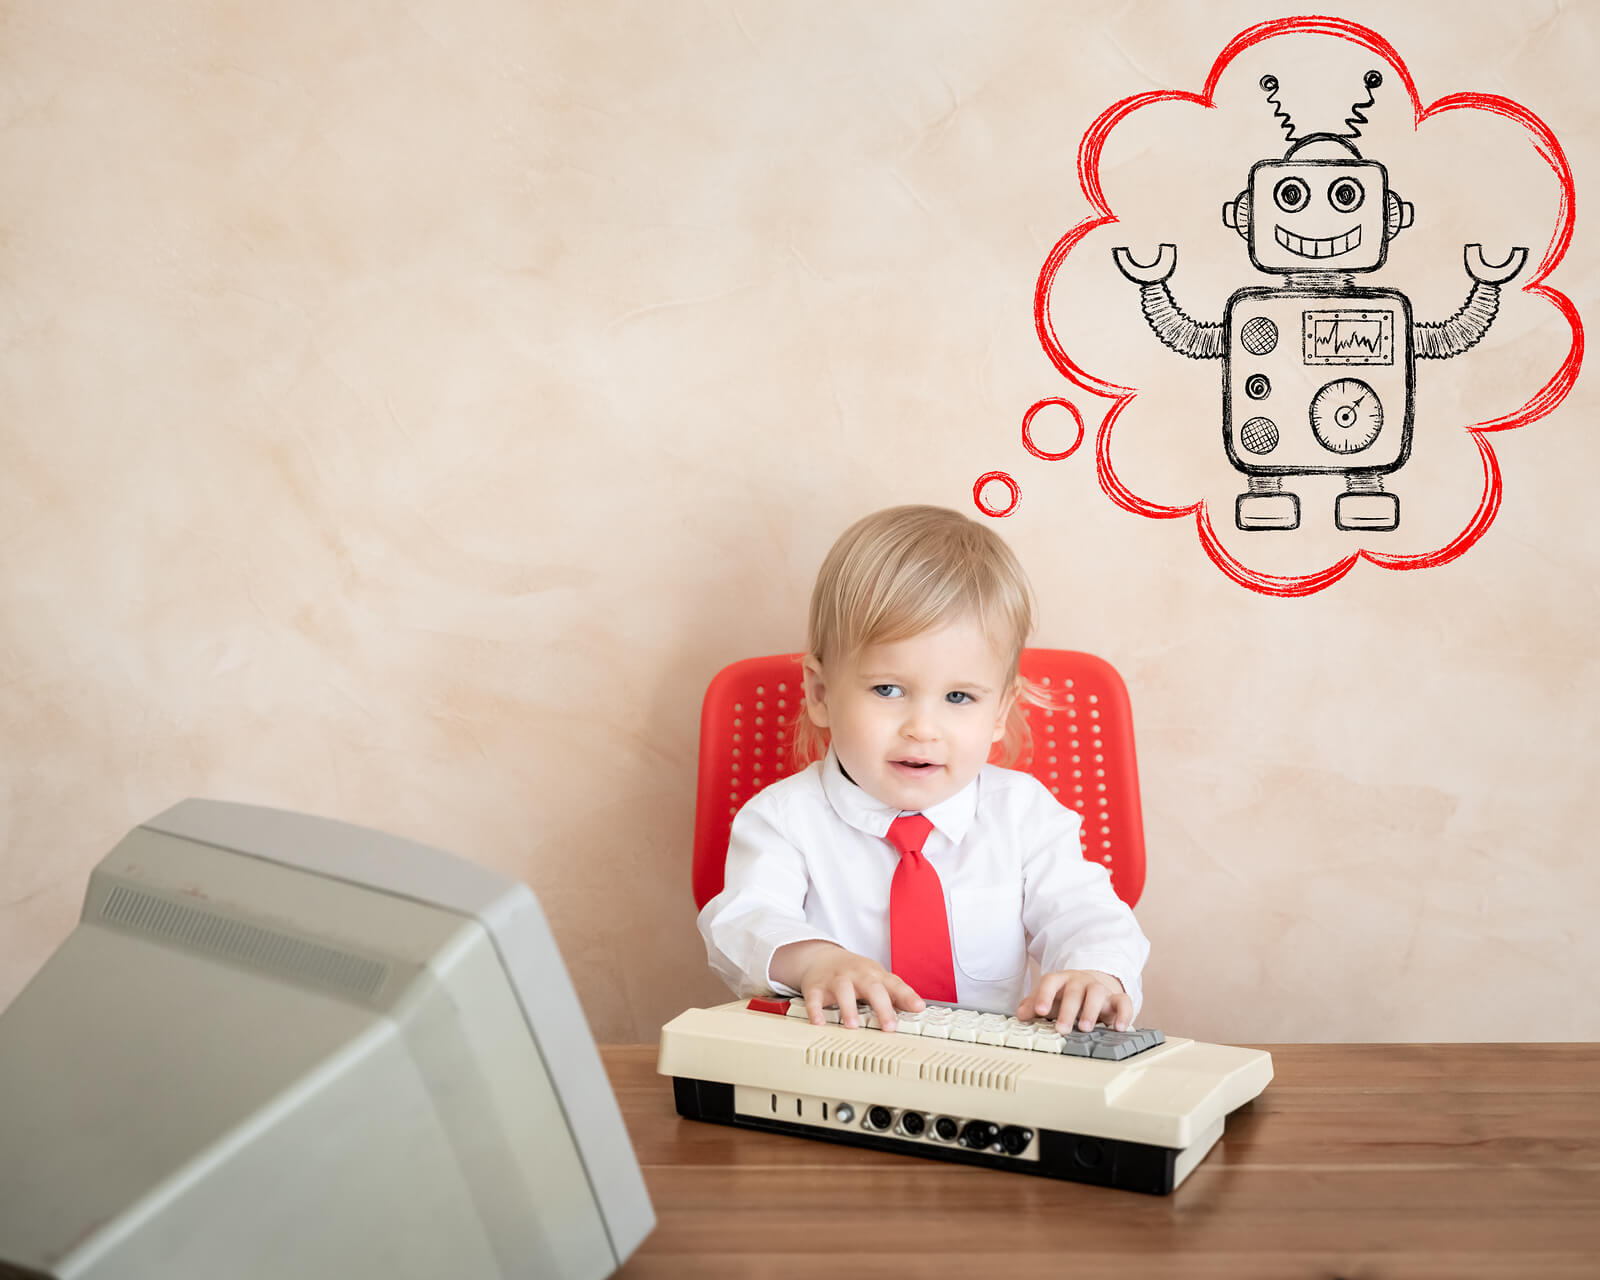 A toddler sitting on an old computer with a thought bubble over his head with a robot in it.